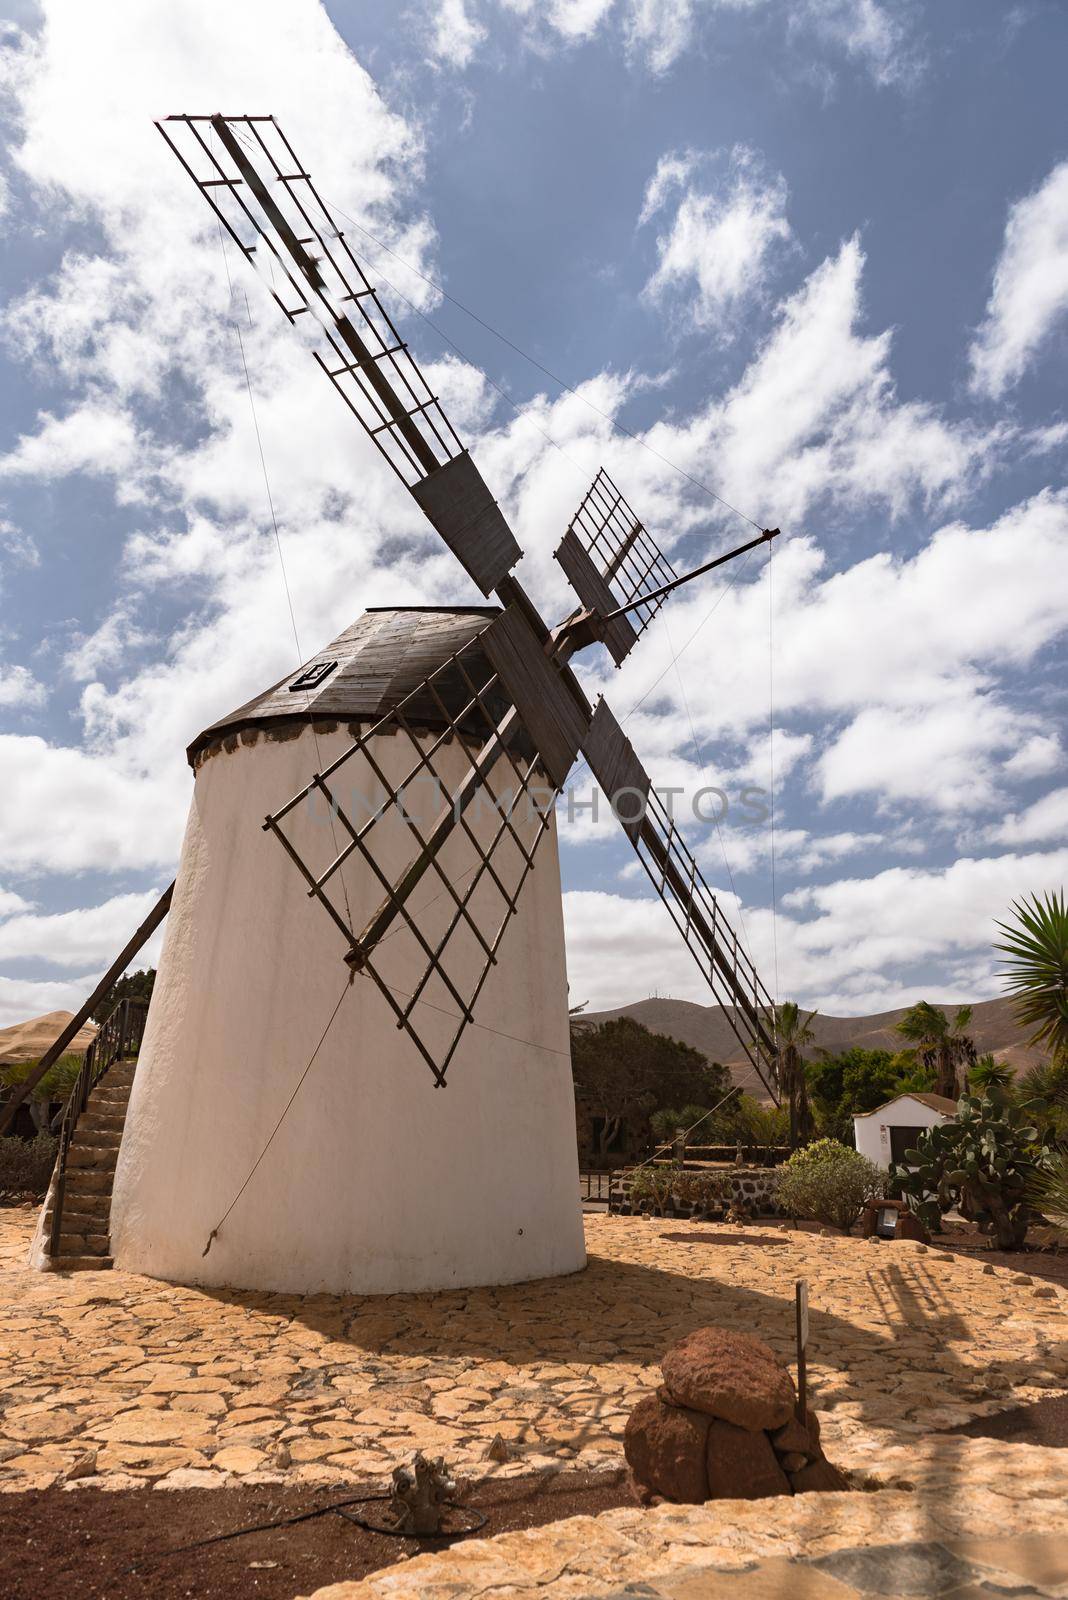 Windmills on the island of Fuerteventura in Spain by martinscphoto